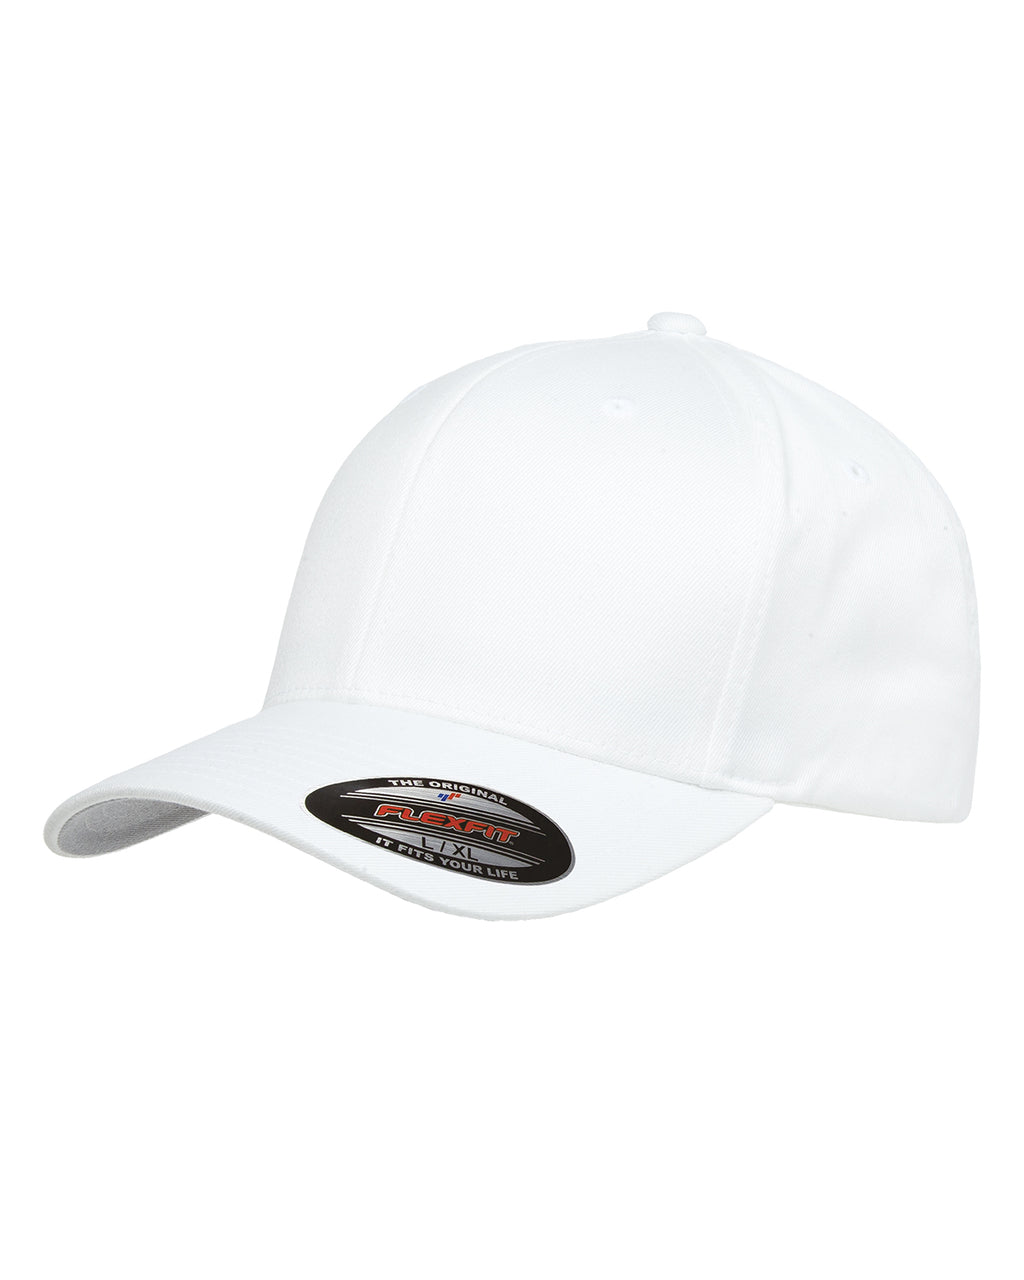 EMS Star of Life Flexfit Hat - Firefighter Clothing & Accessories | Flex Caps